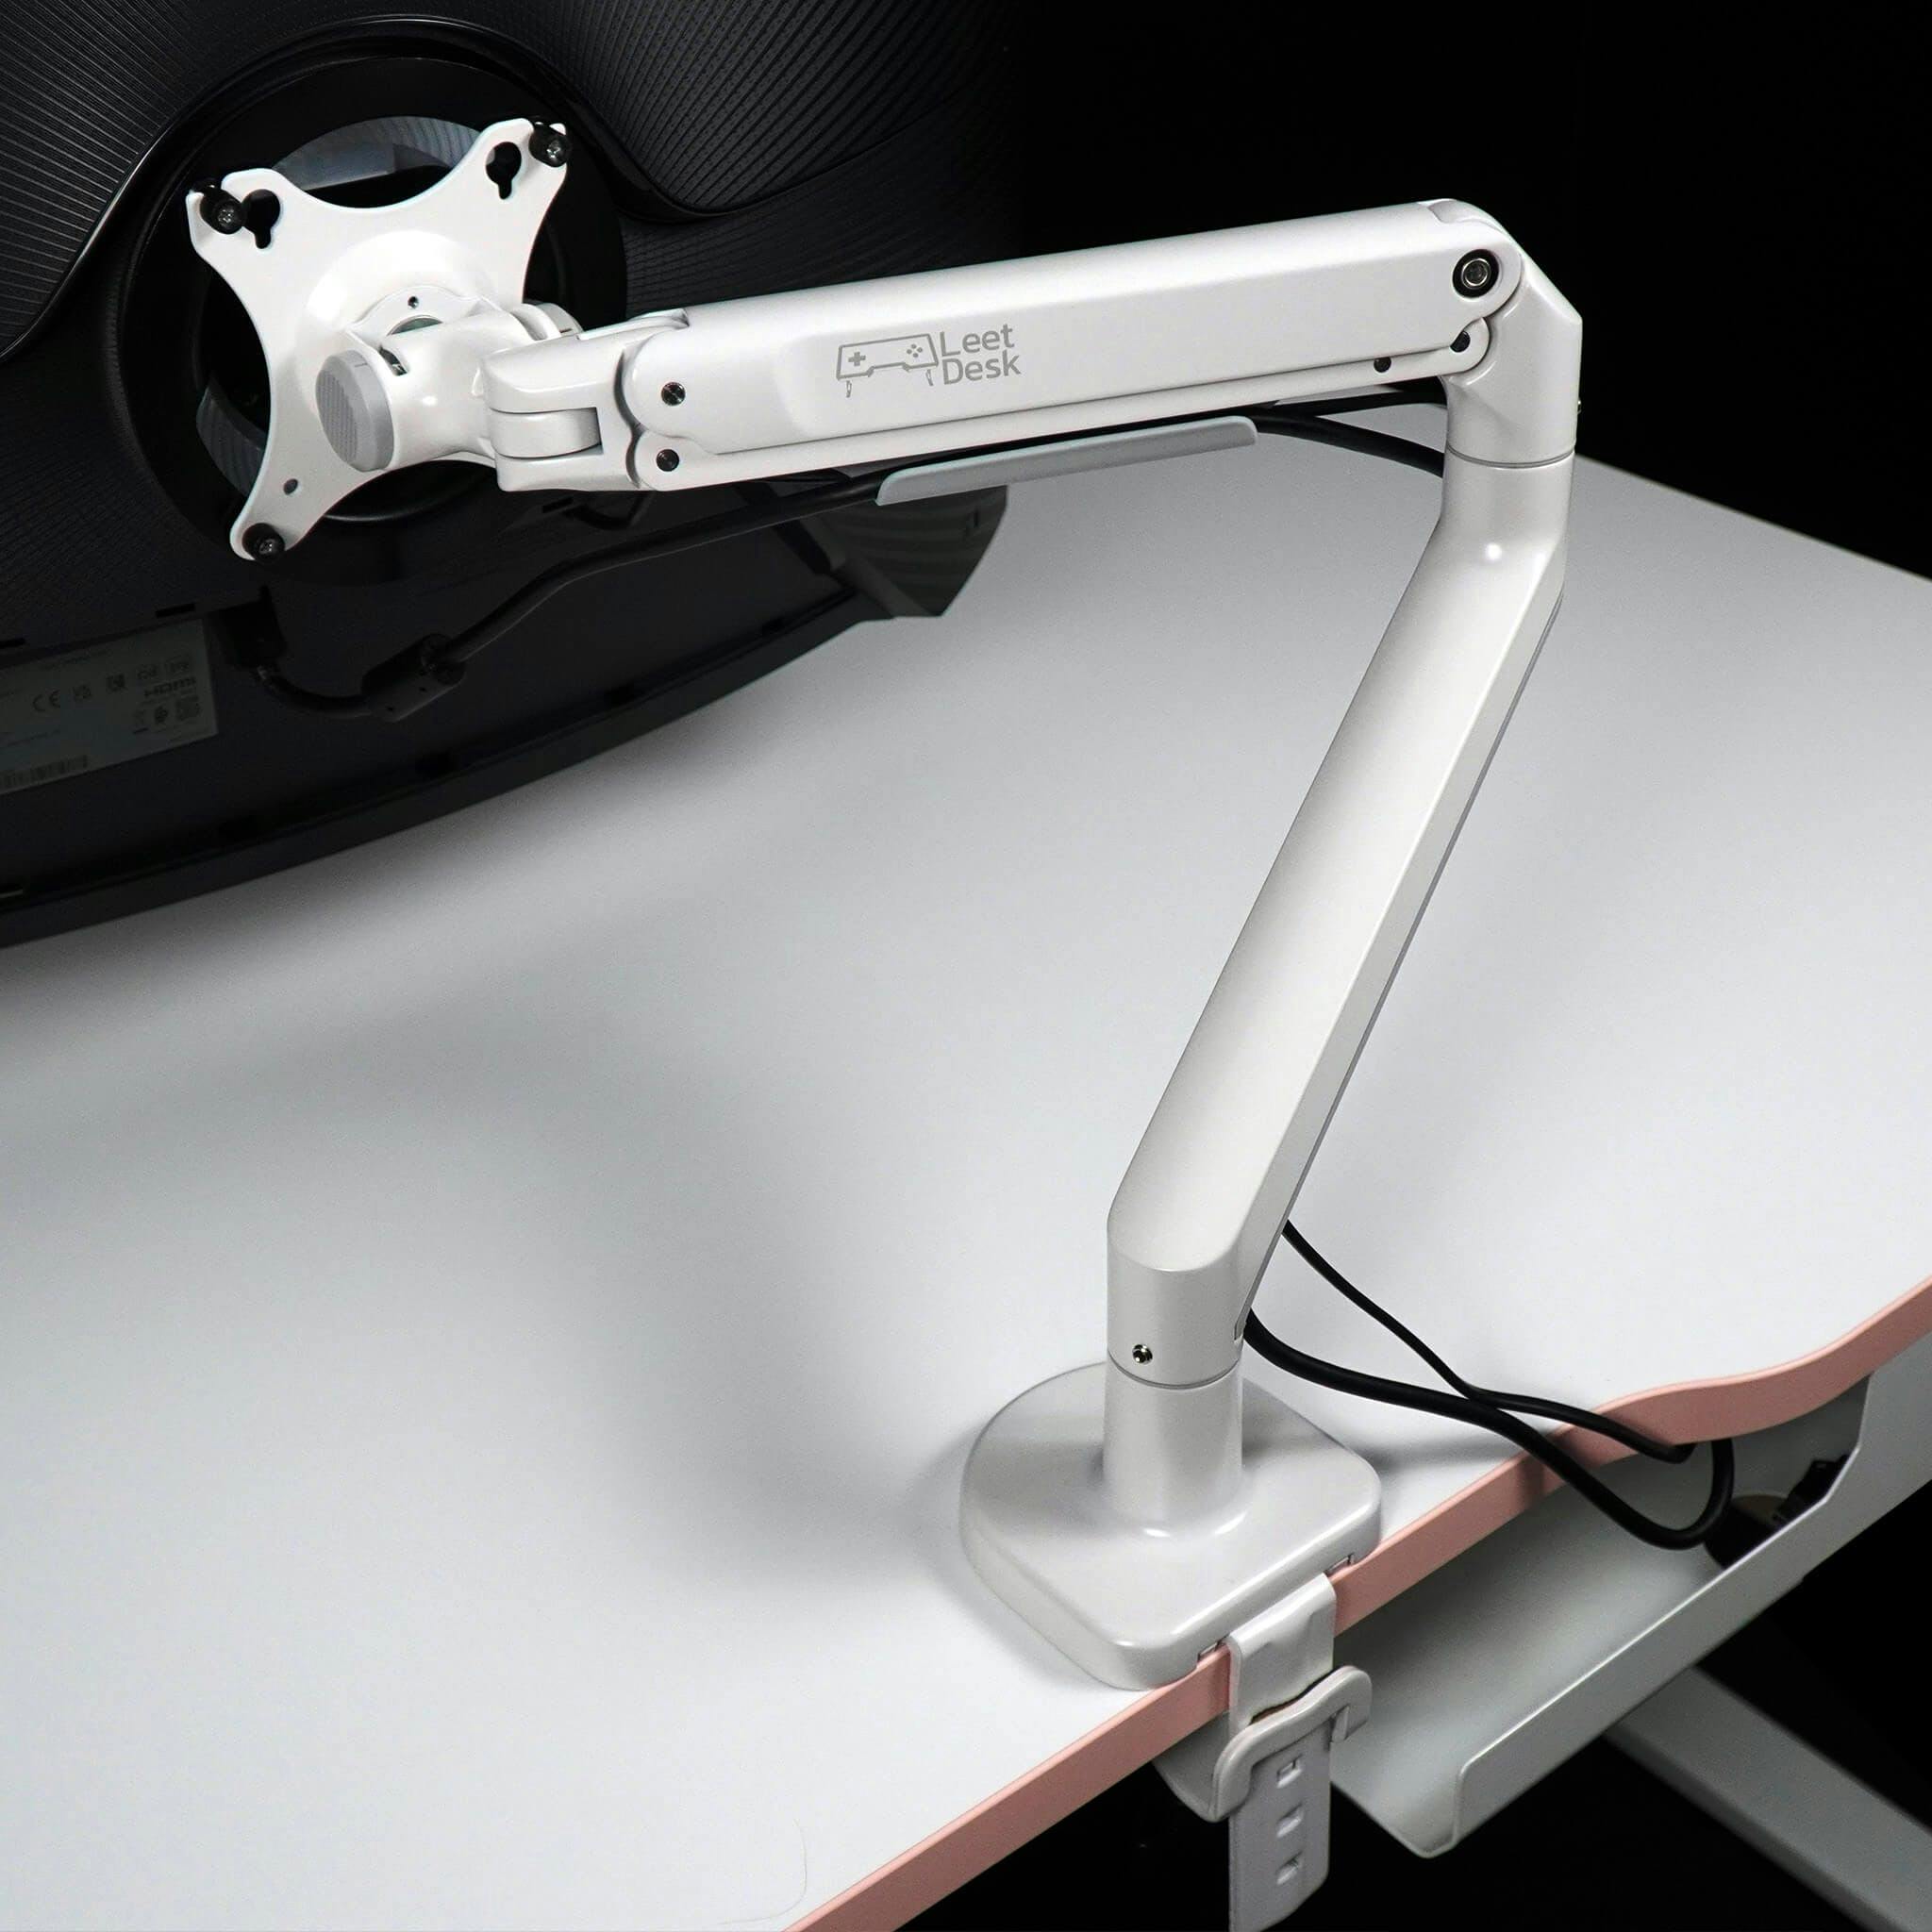 LeetDesk Triple monitor arm for gaming desks - capture of the arm on the monitor